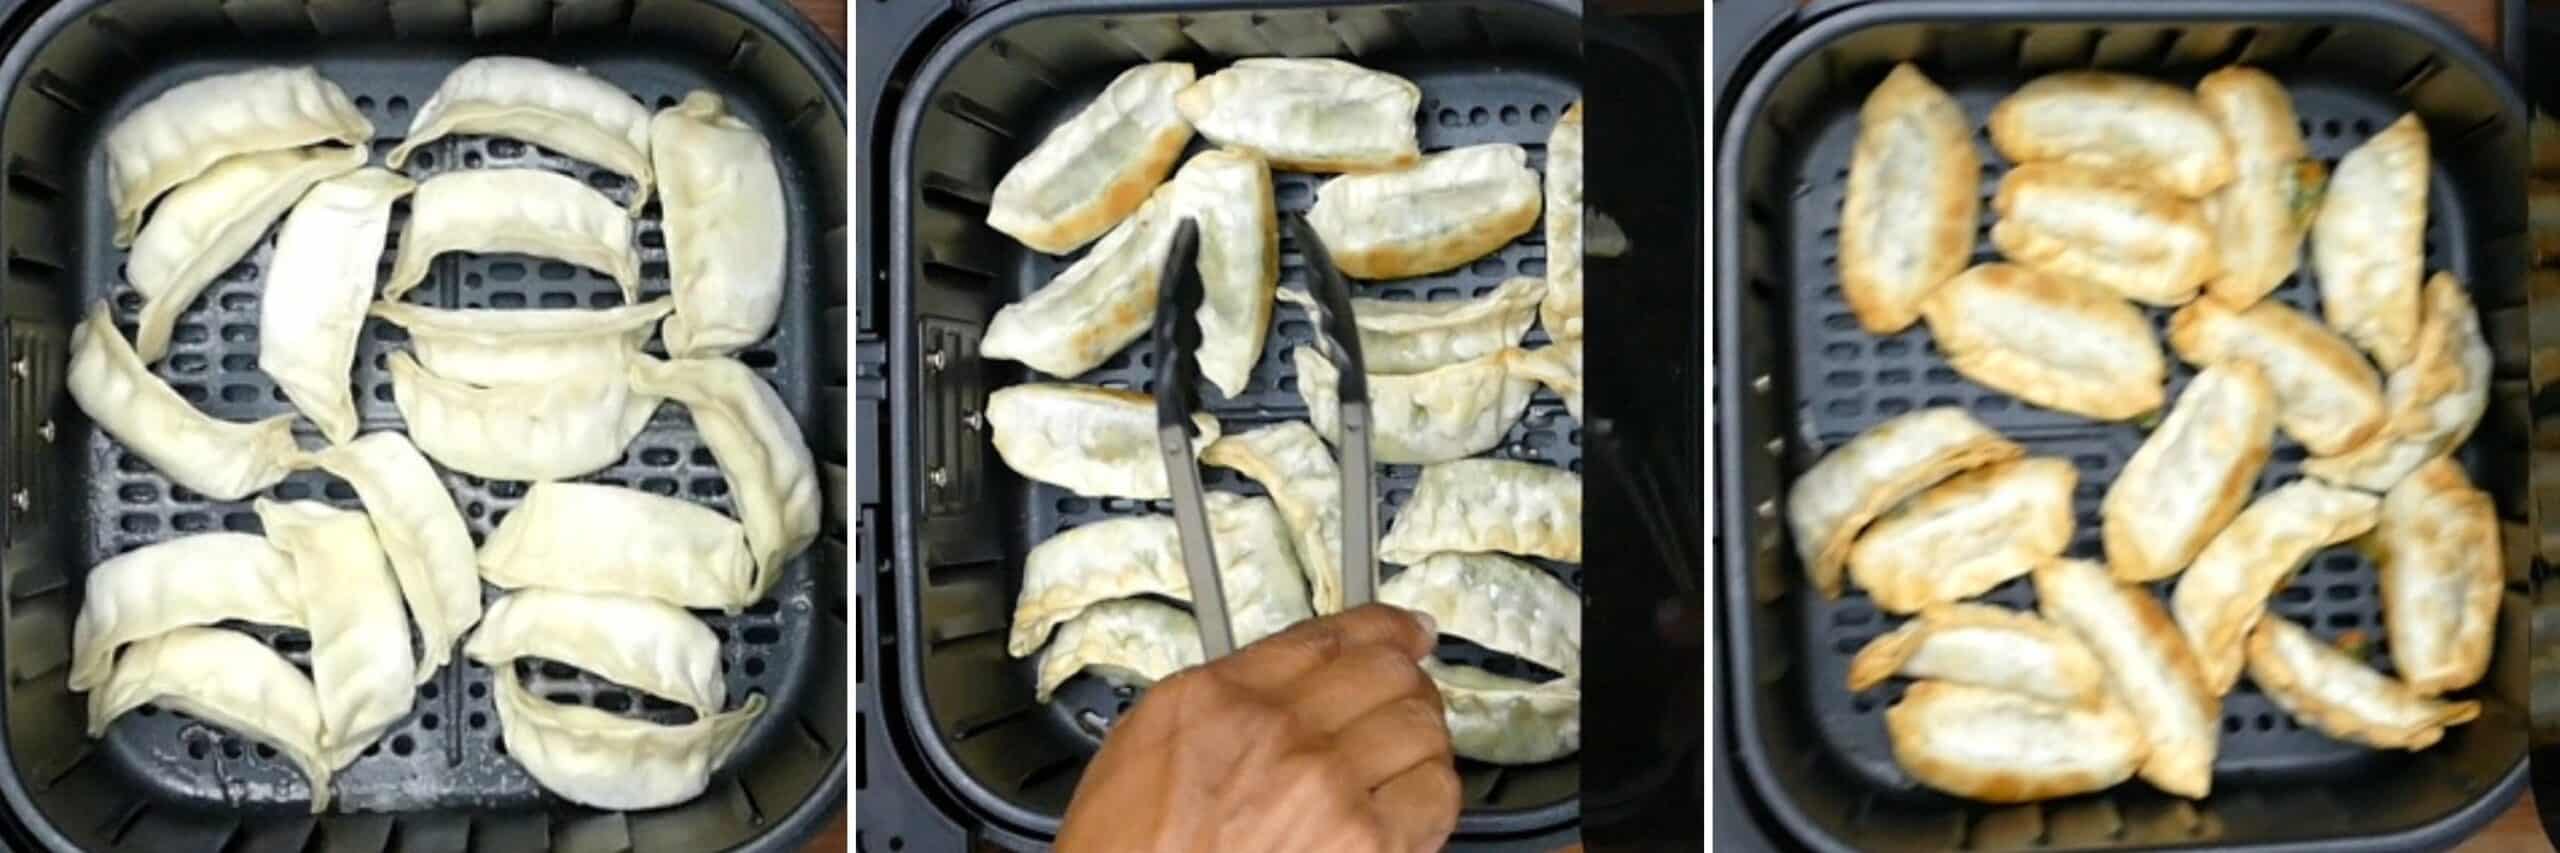 Air fryer trader joe's gyoza collage - frozen gyoza in air fryer, being turned with tongs, cooked gyoza